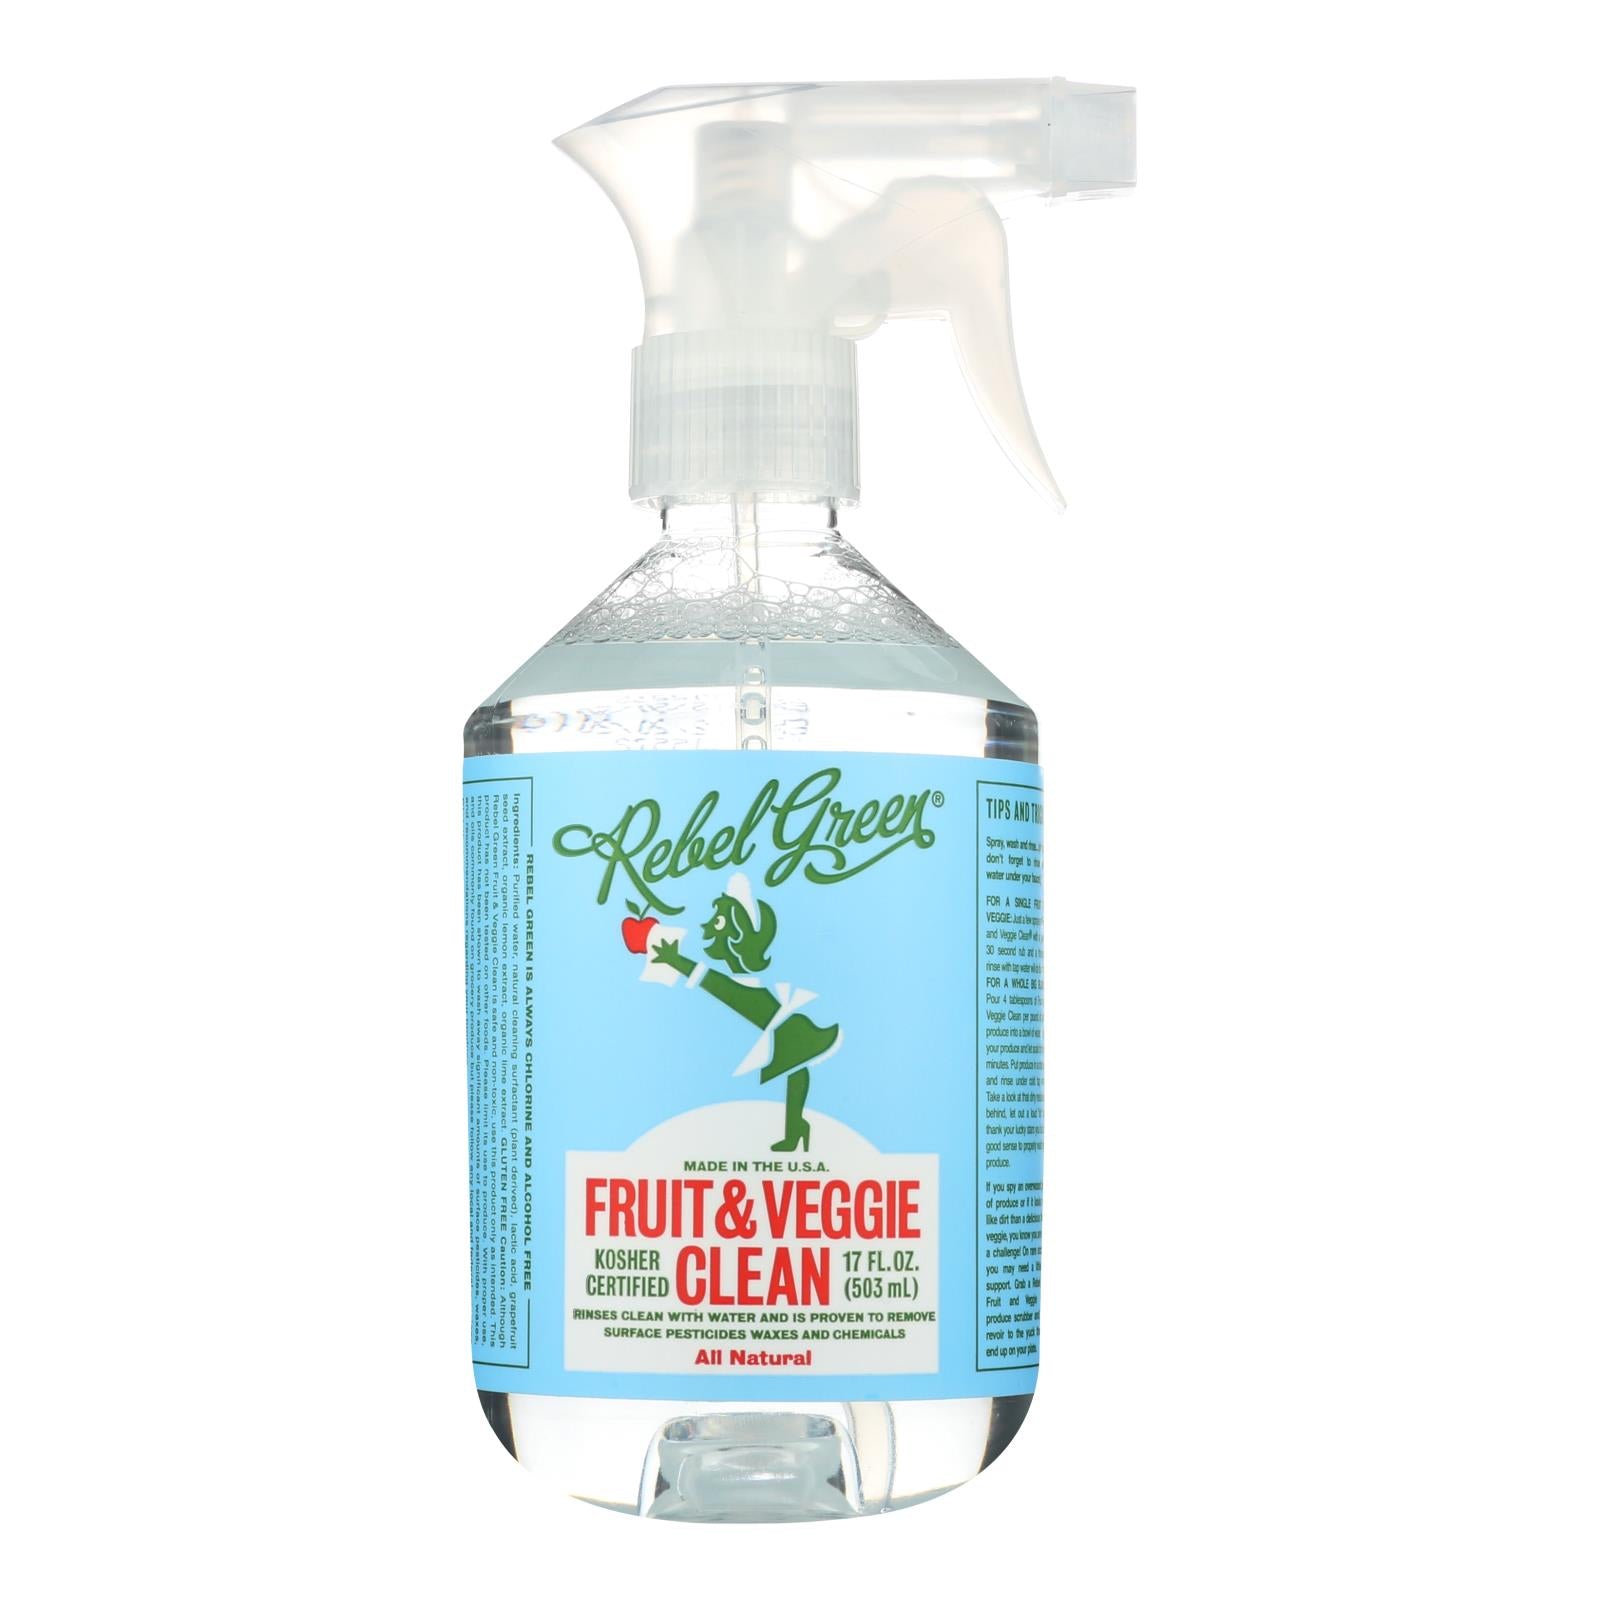 Rebel Green Cleaning Spray - Fruit and Veggie - Case of 12 - 17 fl oz